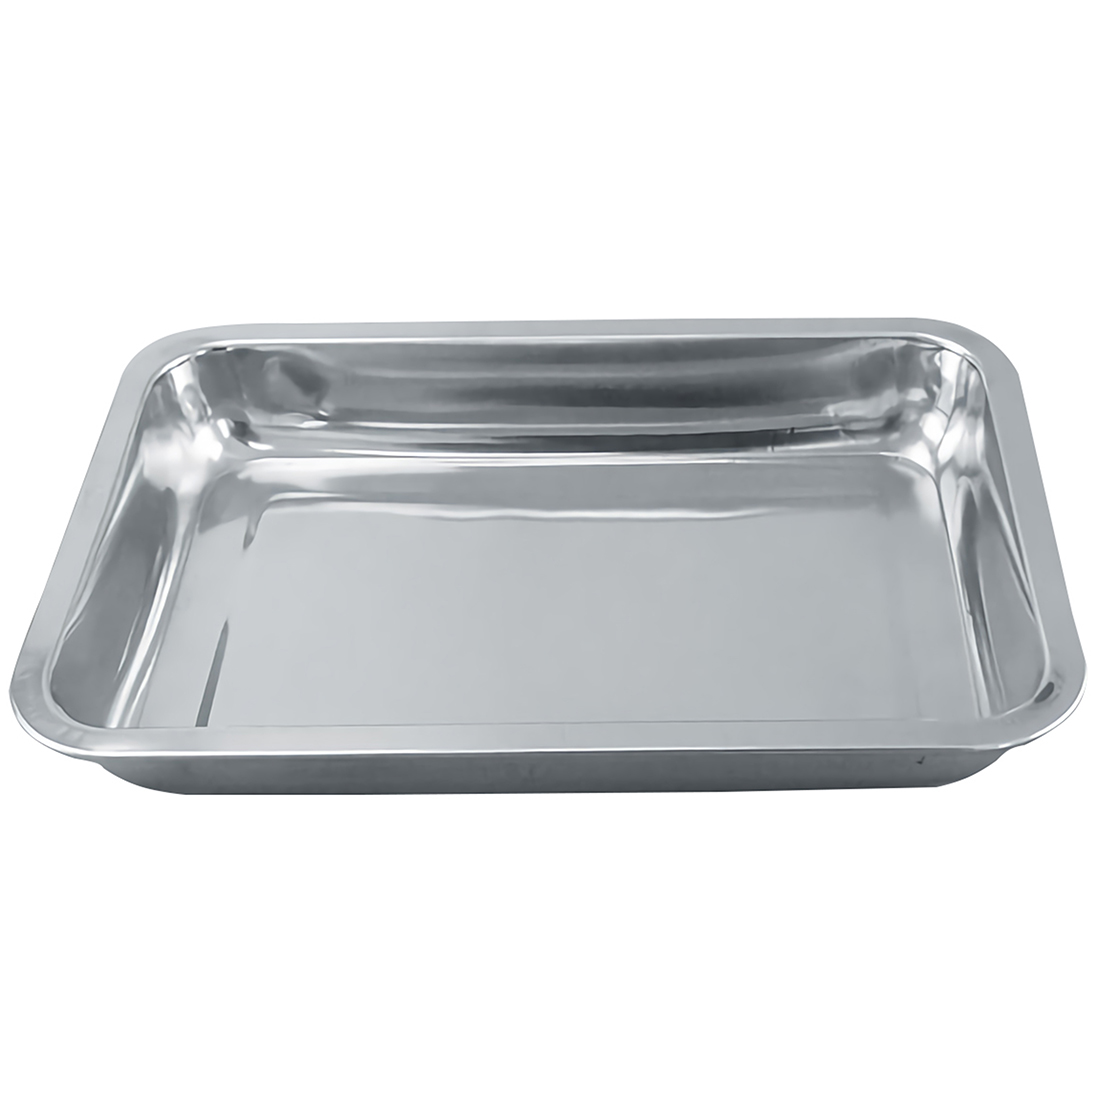 ADAMAS BETA 304 Stainless Steel Square Plate Laboratory Appliances Holding Tray Rectangular Shallow Dish for Kitchen/Baking Container